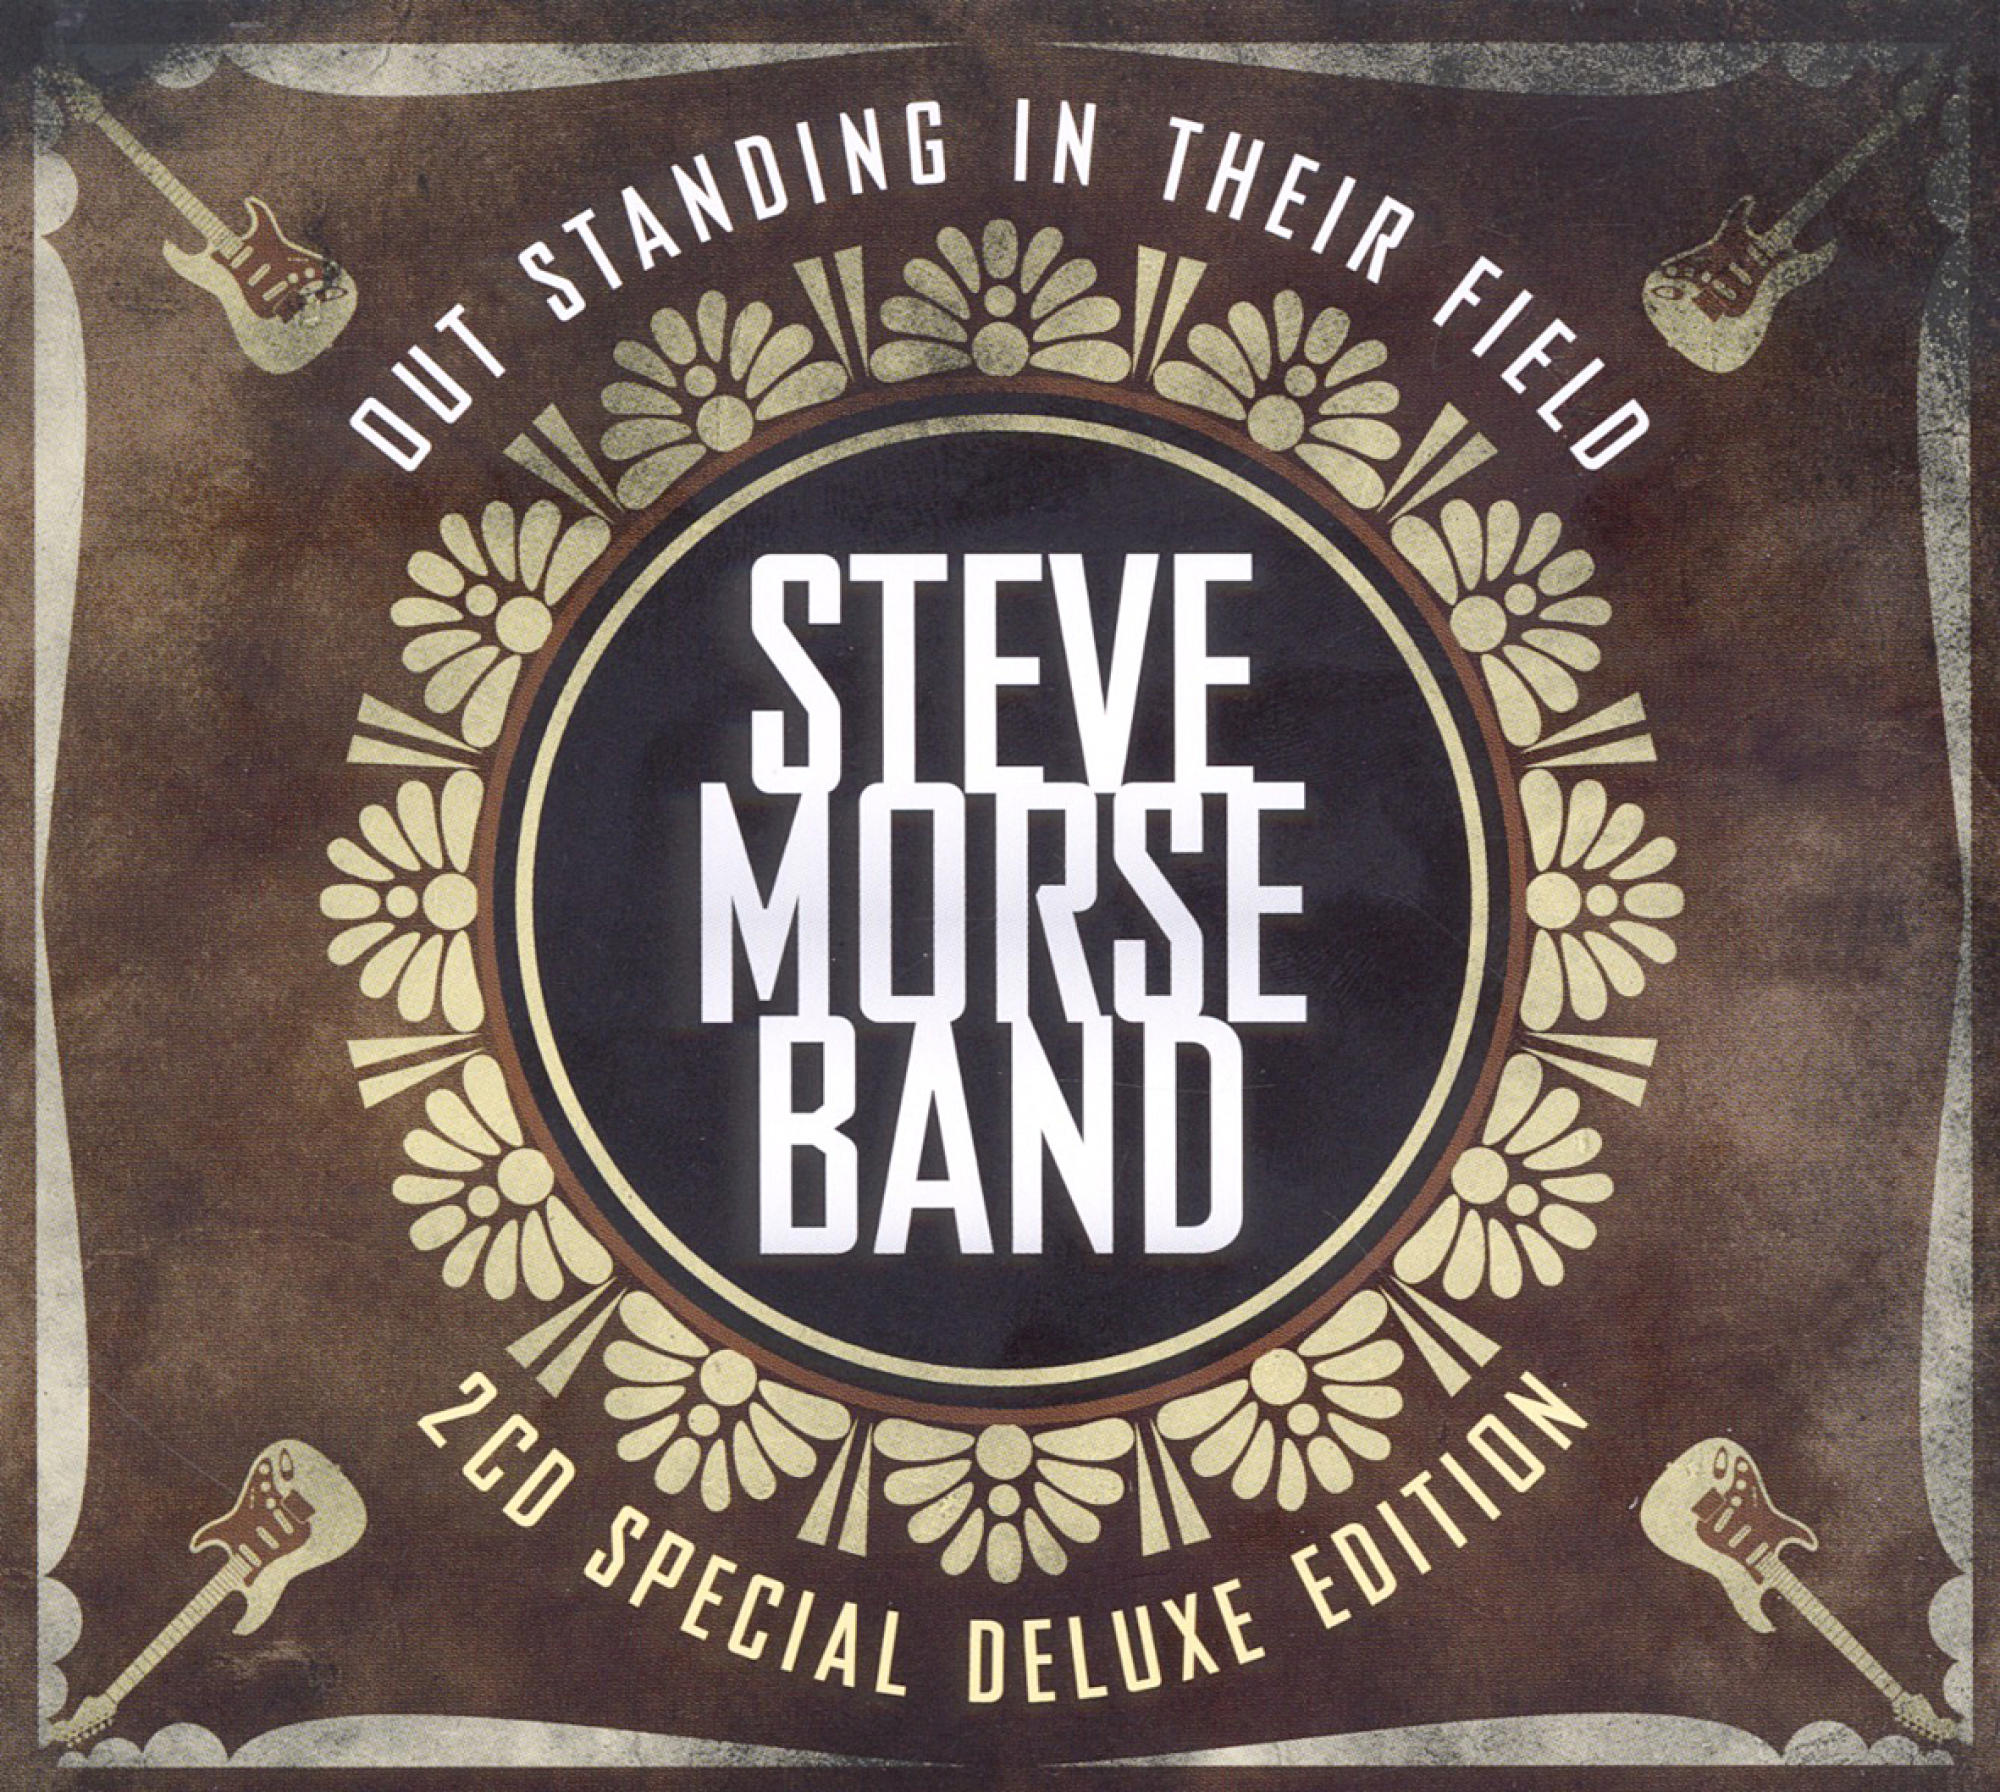 Live & From Morse - (CD) Ed - Germany-Spec.Deluxe Steve Standing Out